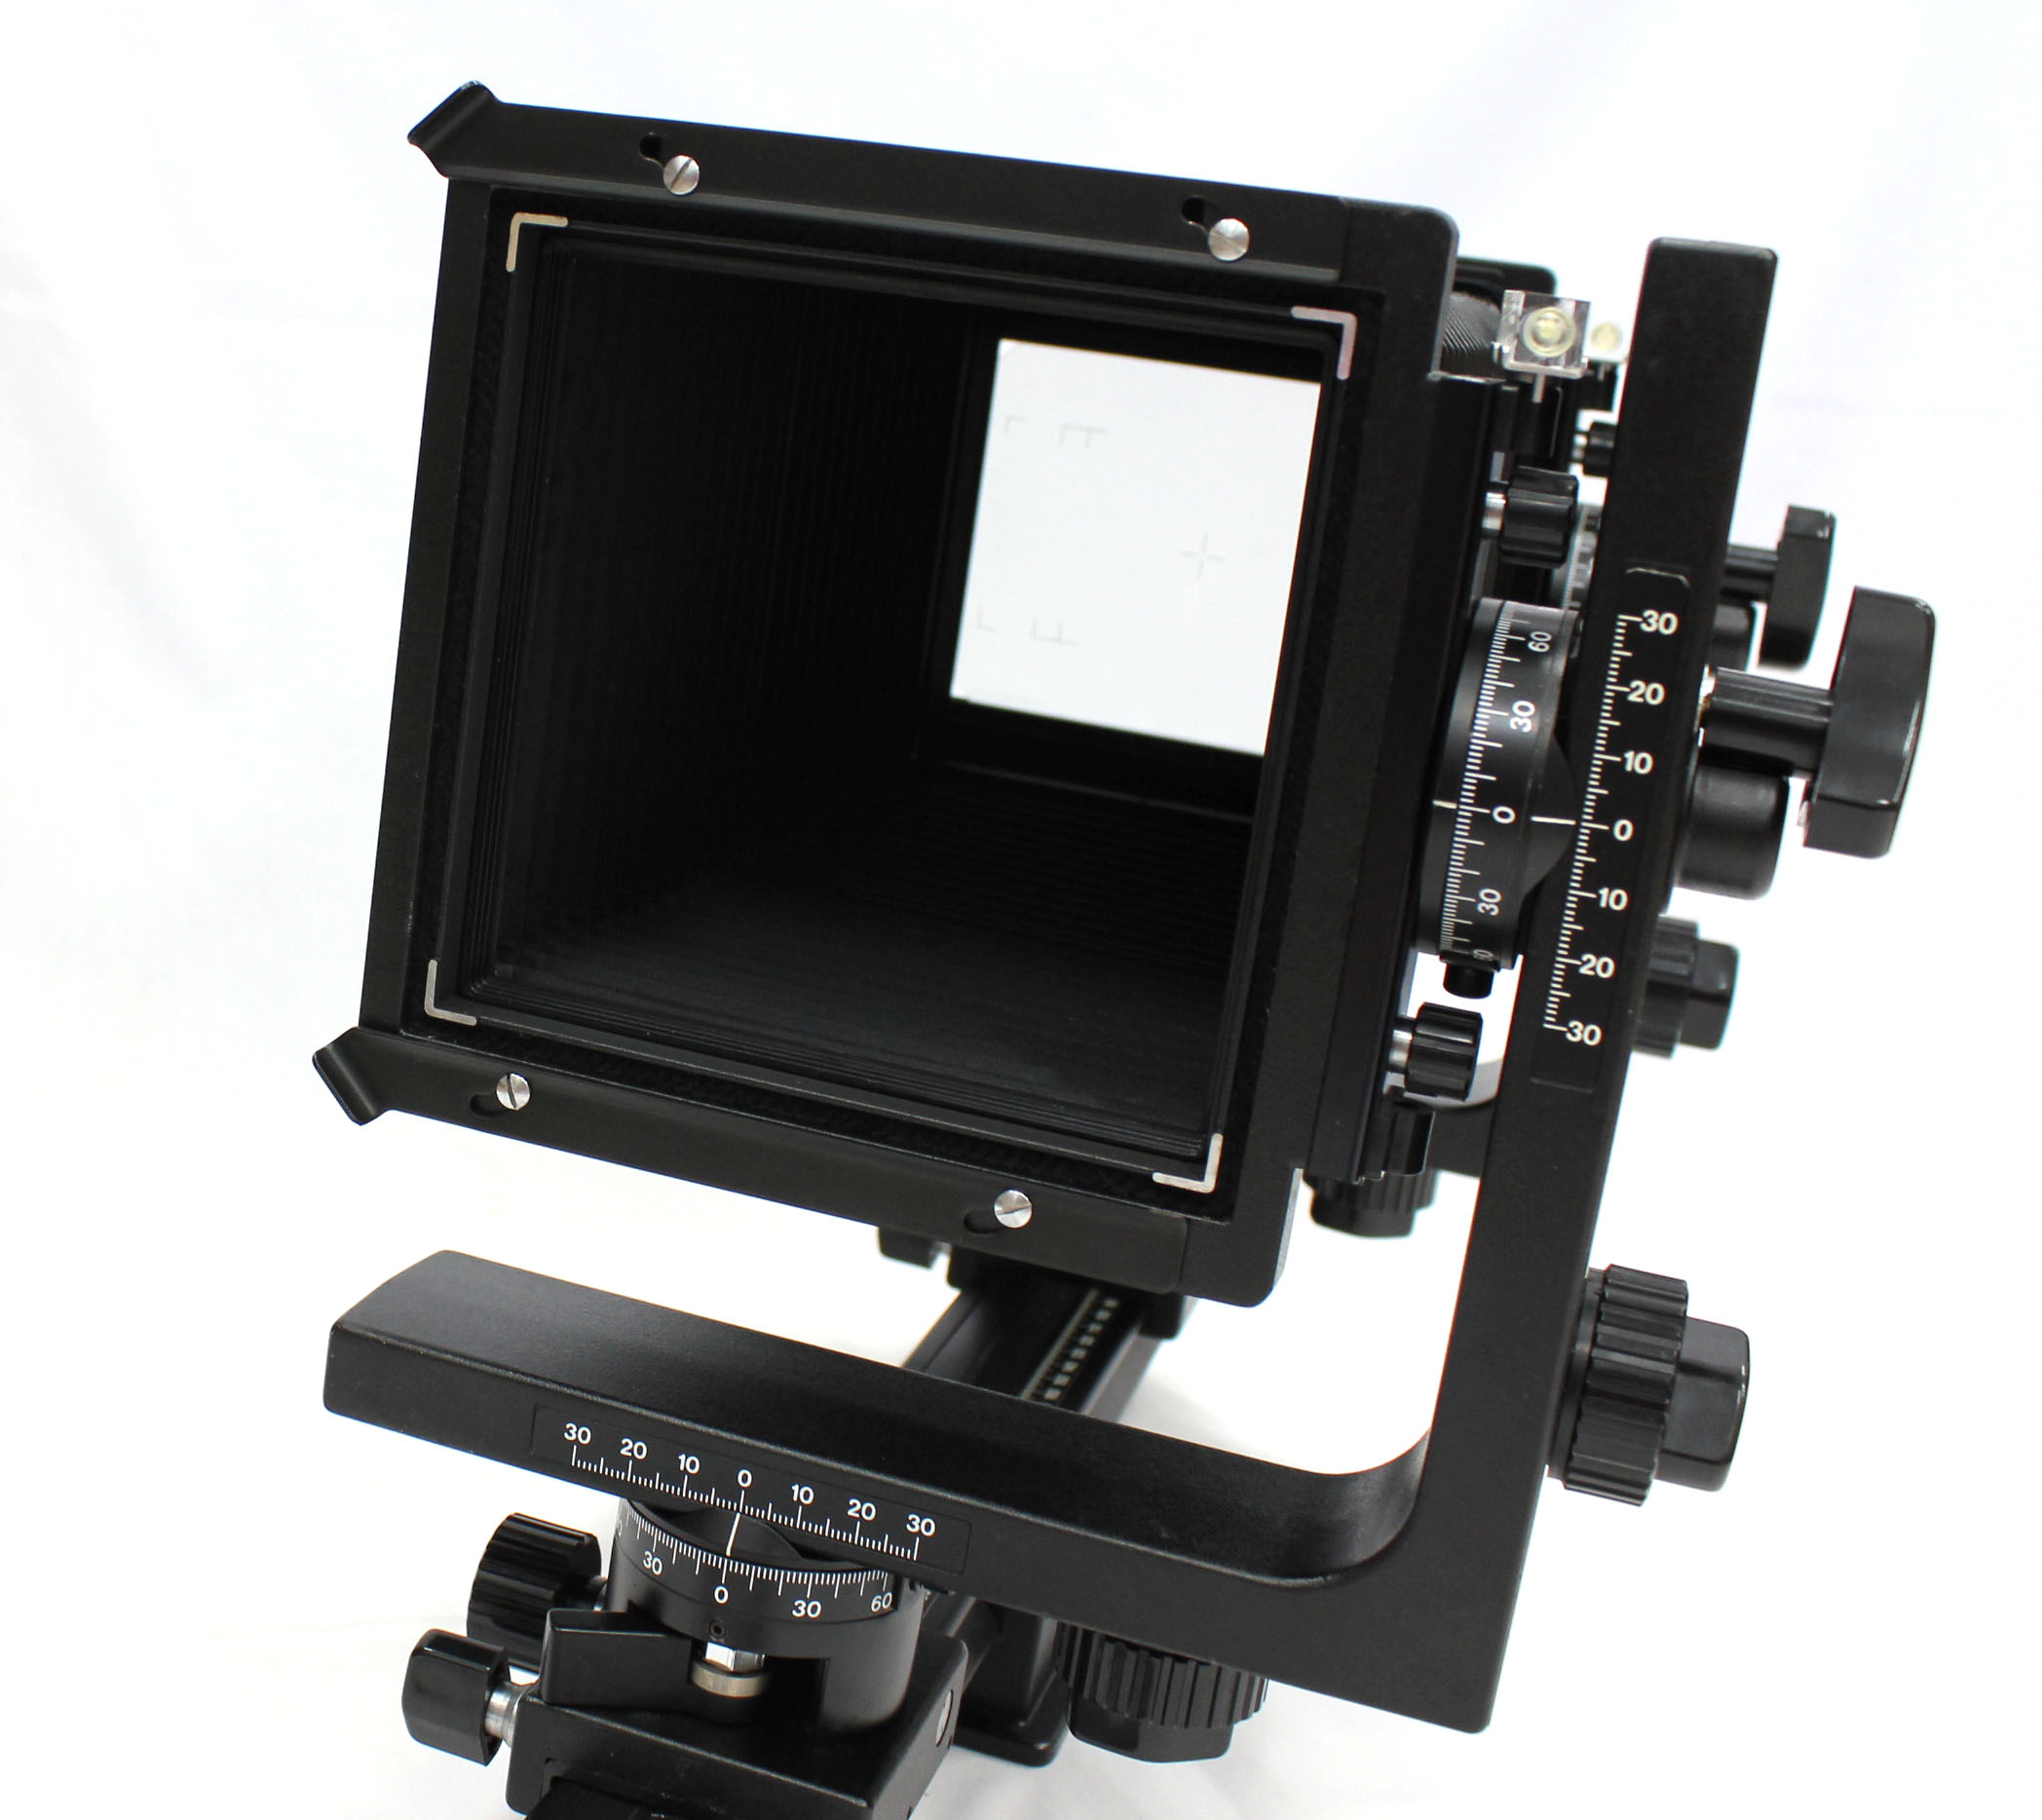 Horseman L45 4x5 Large Format View Type Monorail Camera with 3 Cut Film Holders from Japan Photo 6